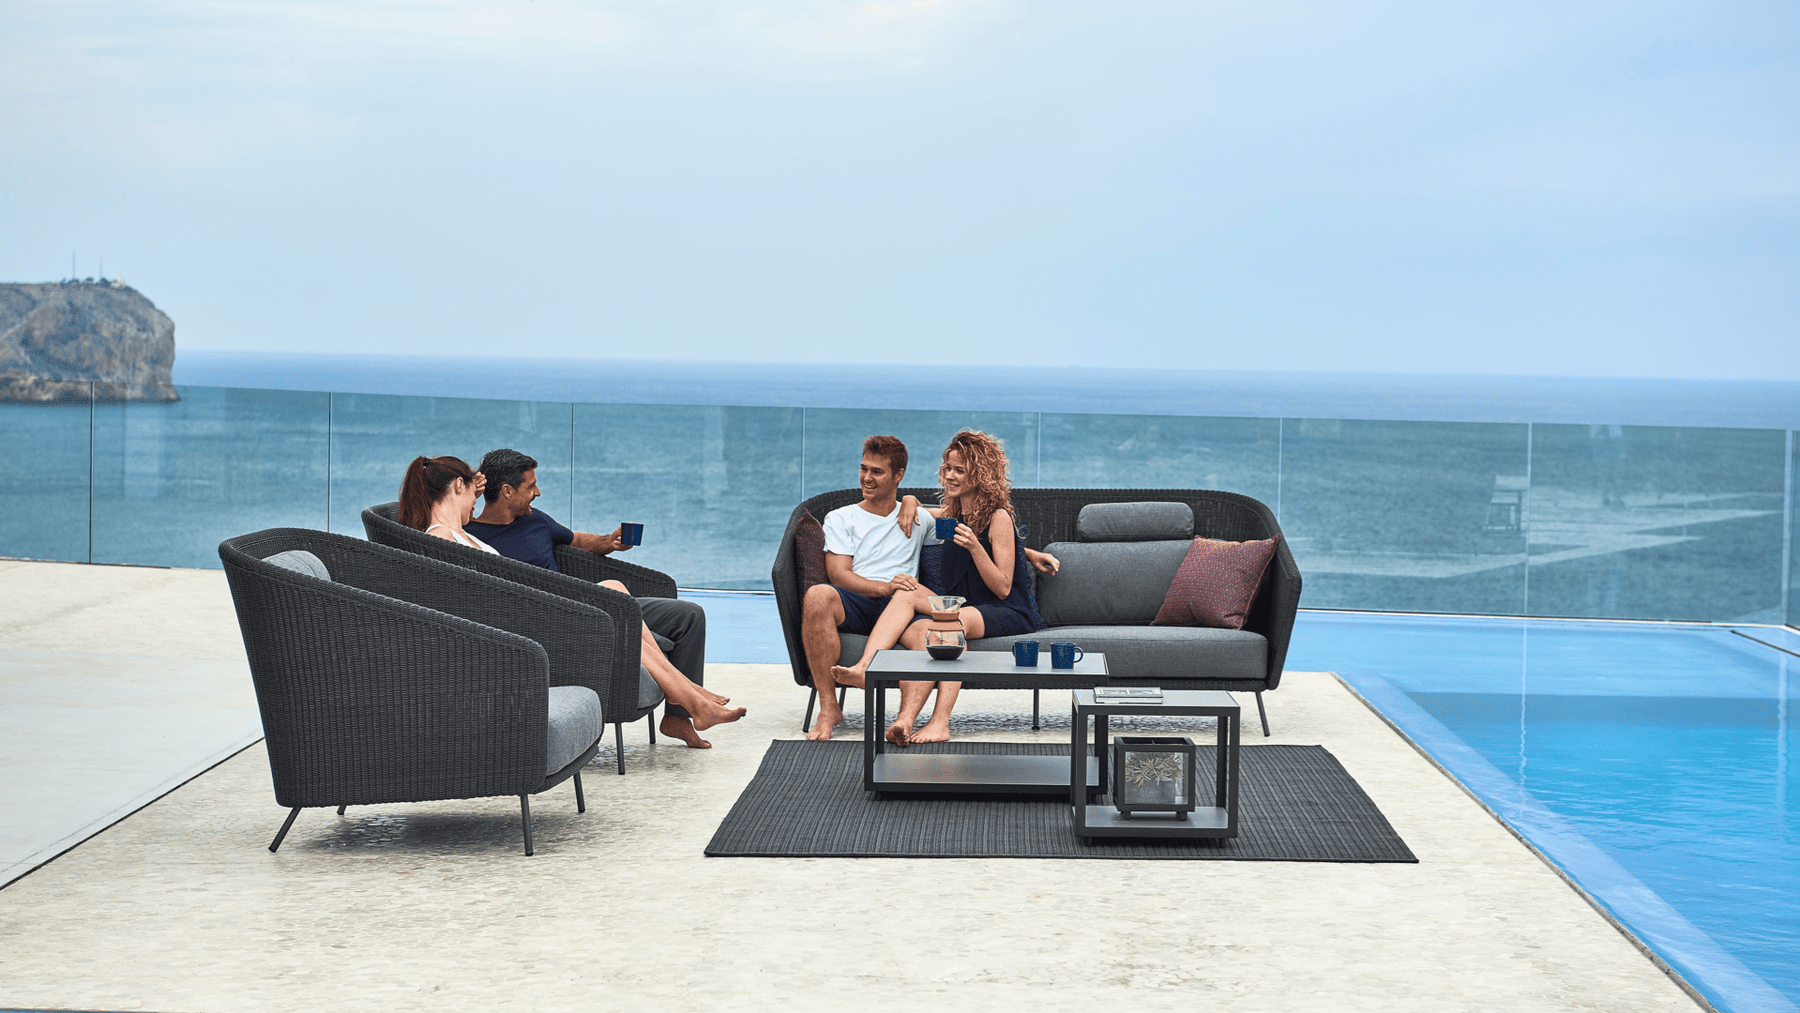 Friends talk on a sea-side patio furnished with modern outdoor furniture.